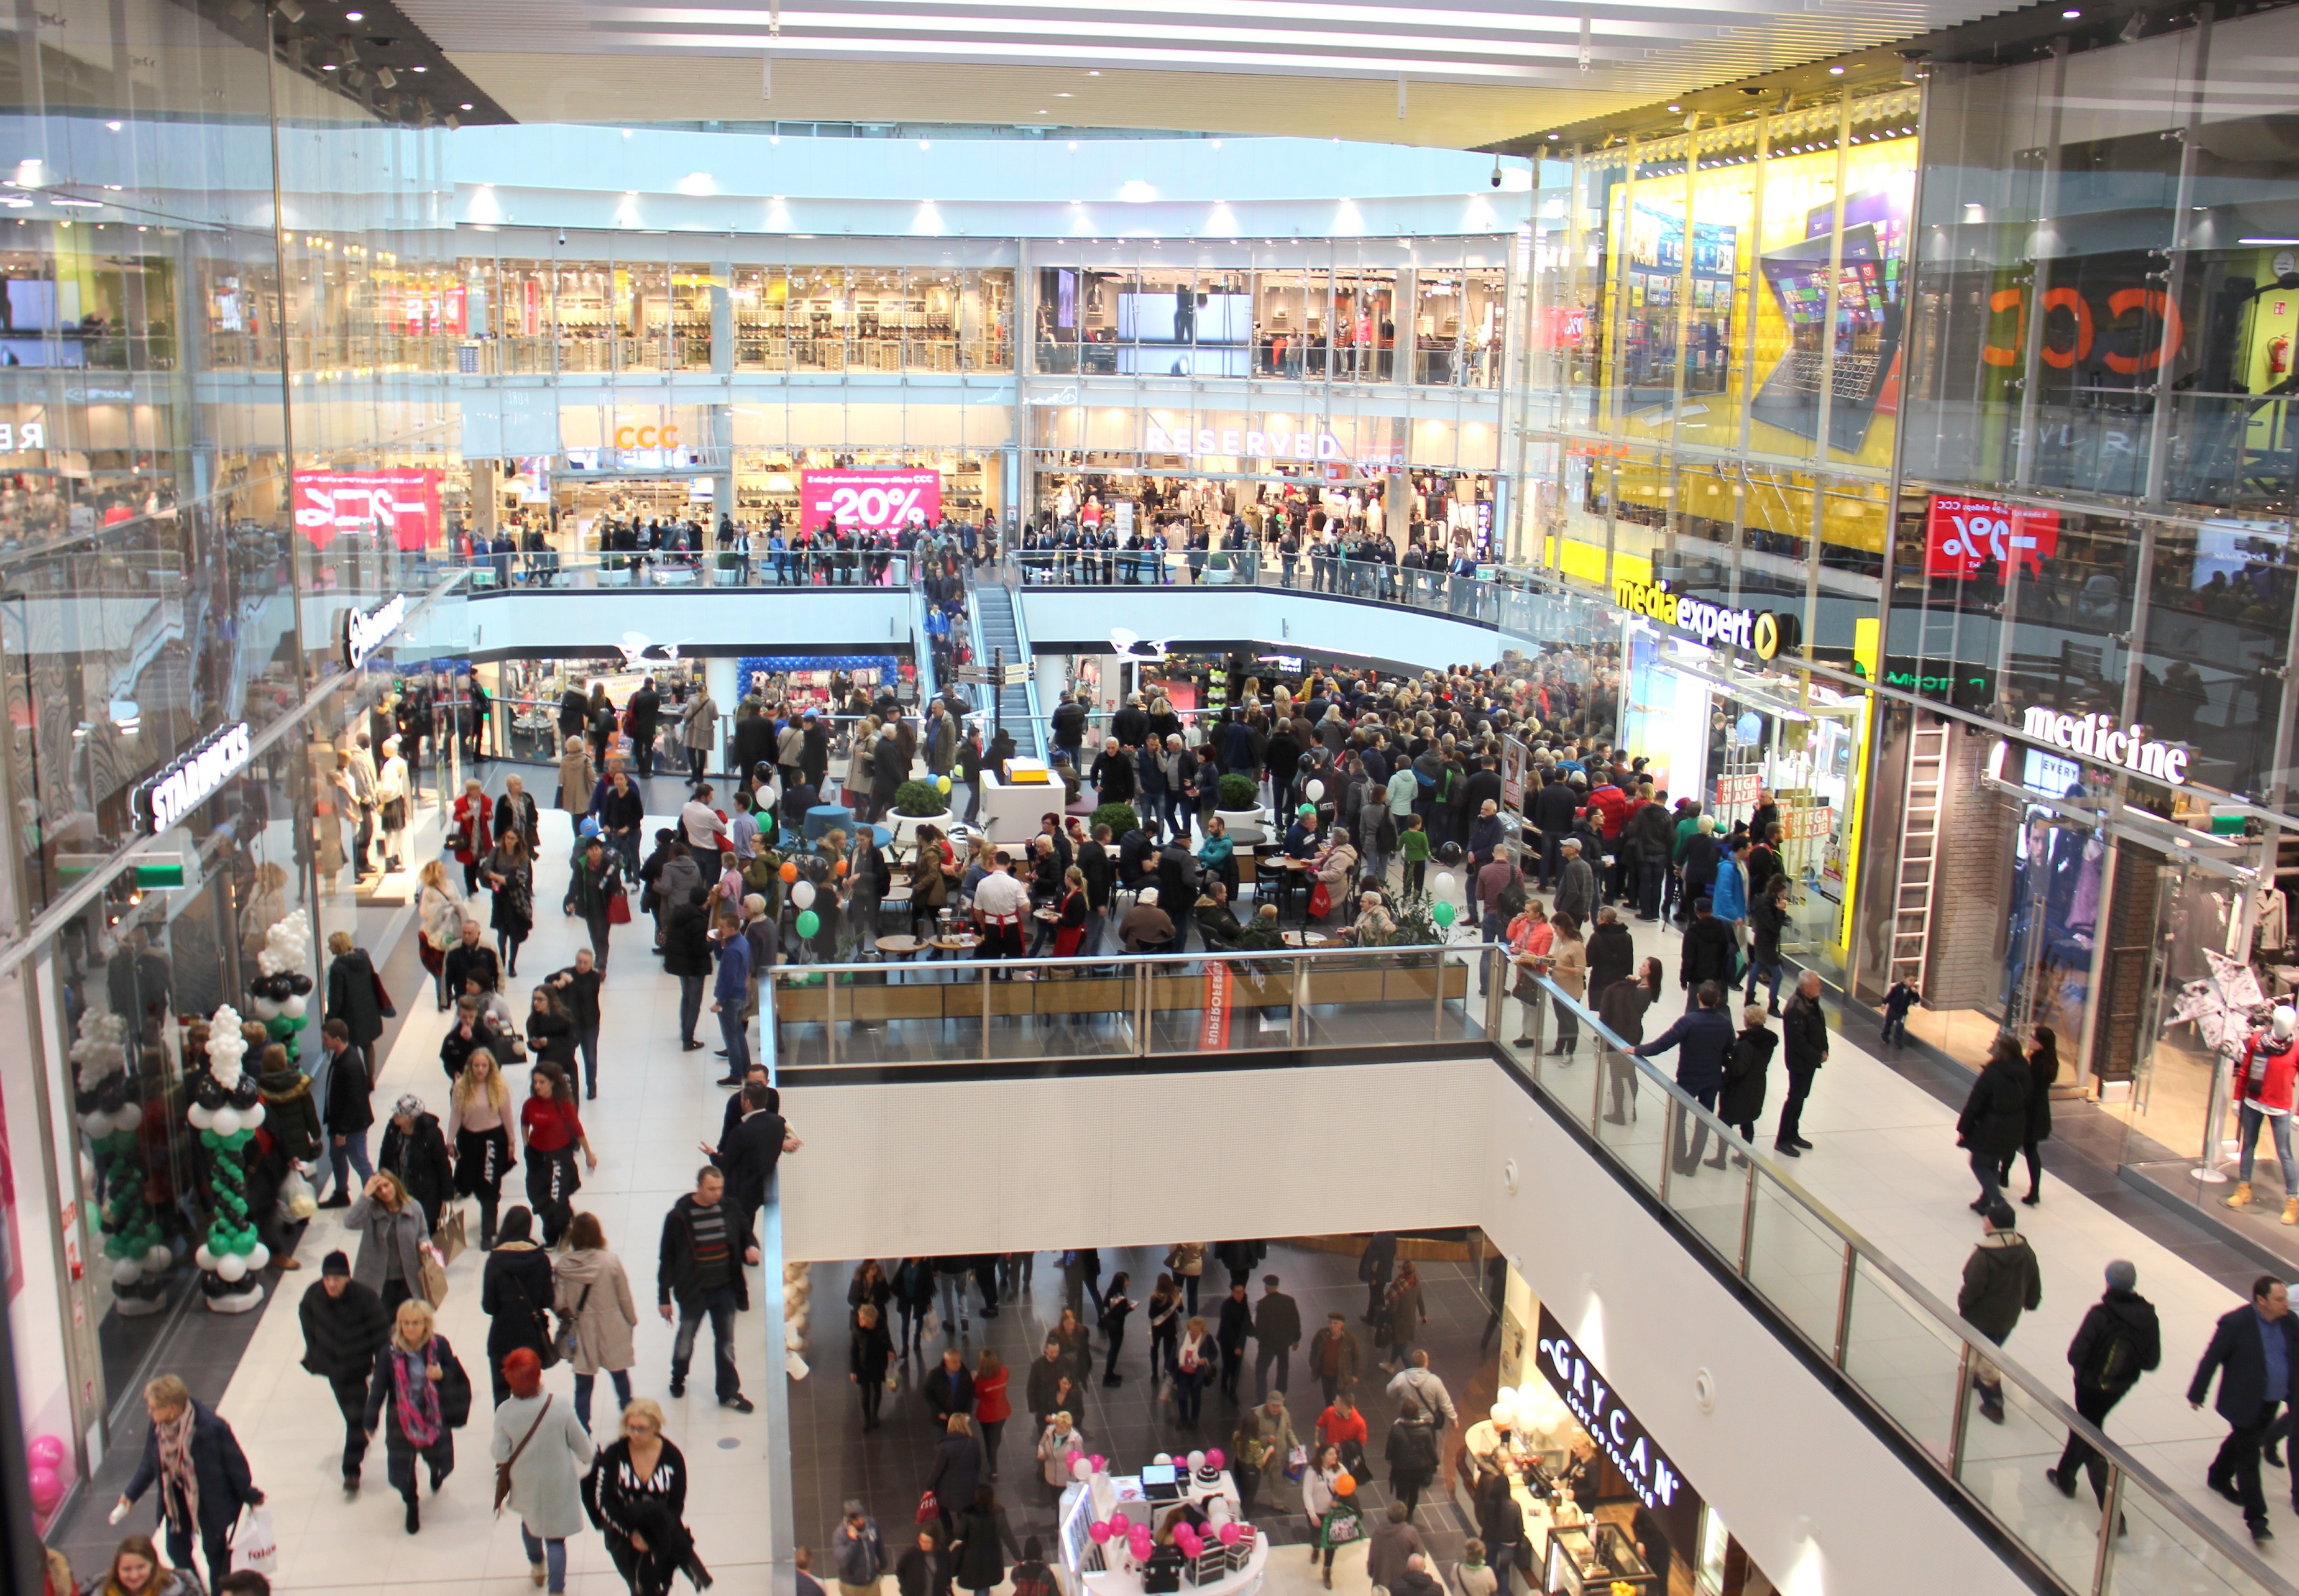 The shopping mall strikes back - Emerging Europe